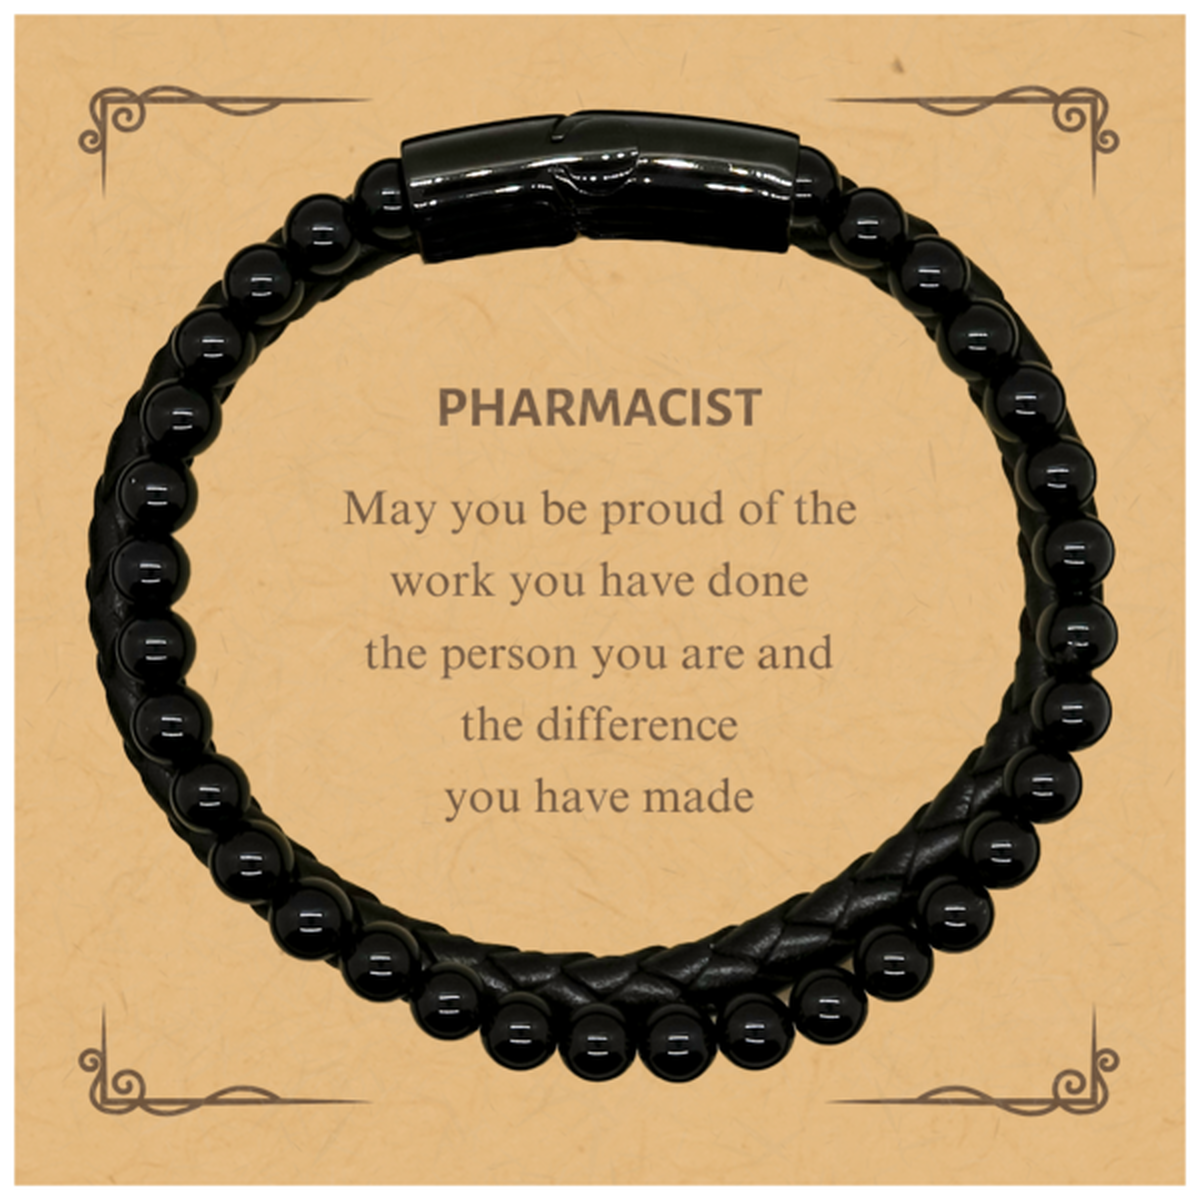 Pharmacist May you be proud of the work you have done, Retirement Pharmacist Stone Leather Bracelets for Colleague Appreciation Gifts Amazing for Pharmacist